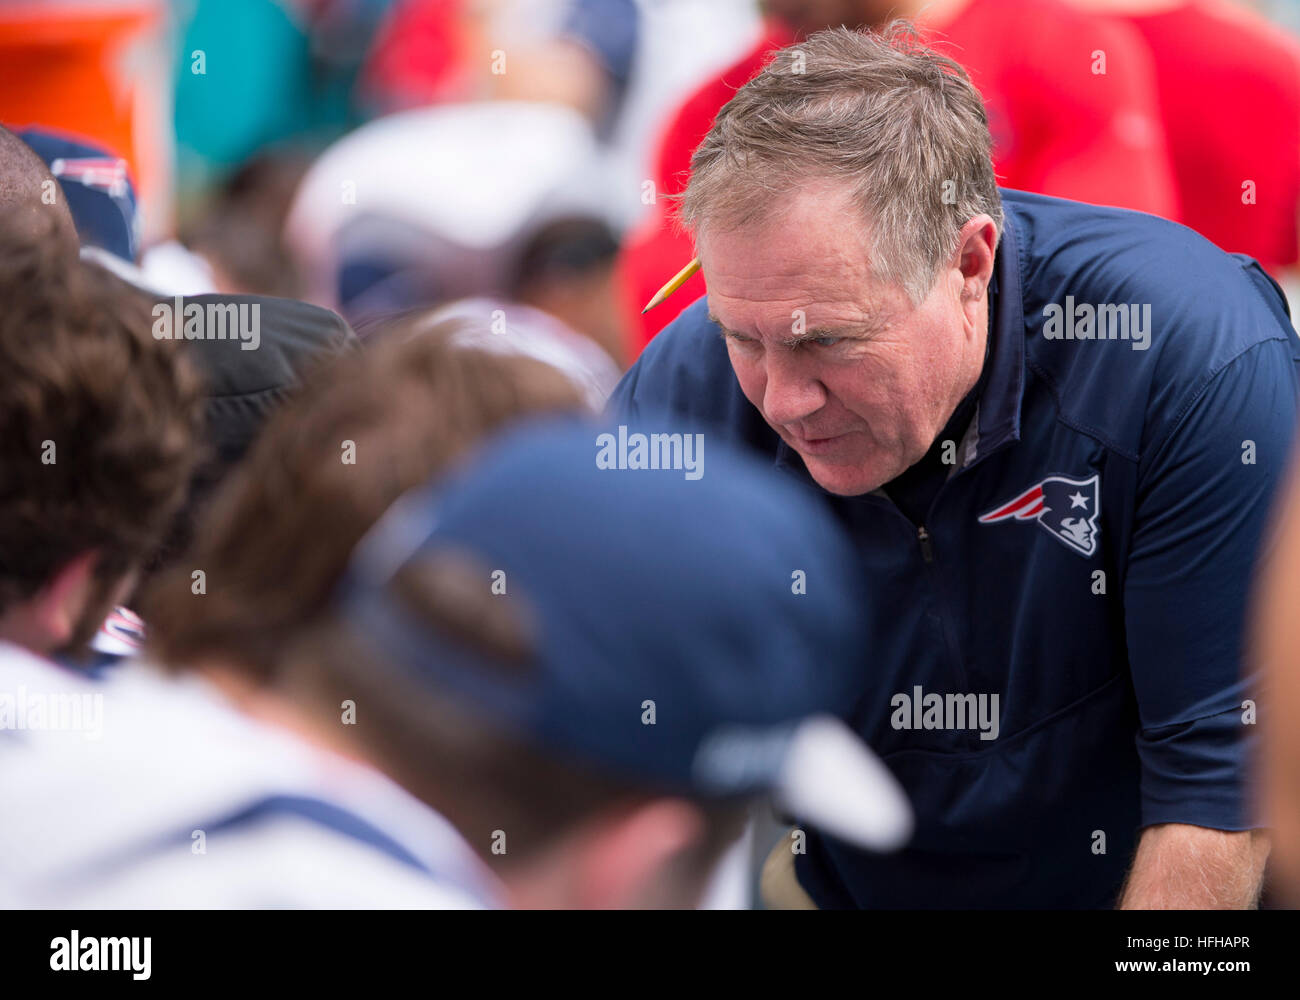 Miami Gardens, Florida, USA. 01st Jan, 2017. New England Patriots Head Coach Bill Belichick talks to the defensive players on the bench during the NFL football game between the New England Patriots and the Miami Dolphins on January 1st 2017, at the Hard Rock Stadium in Miami Gardens, FL. © Action Plus Sports/Alamy Live News Stock Photo